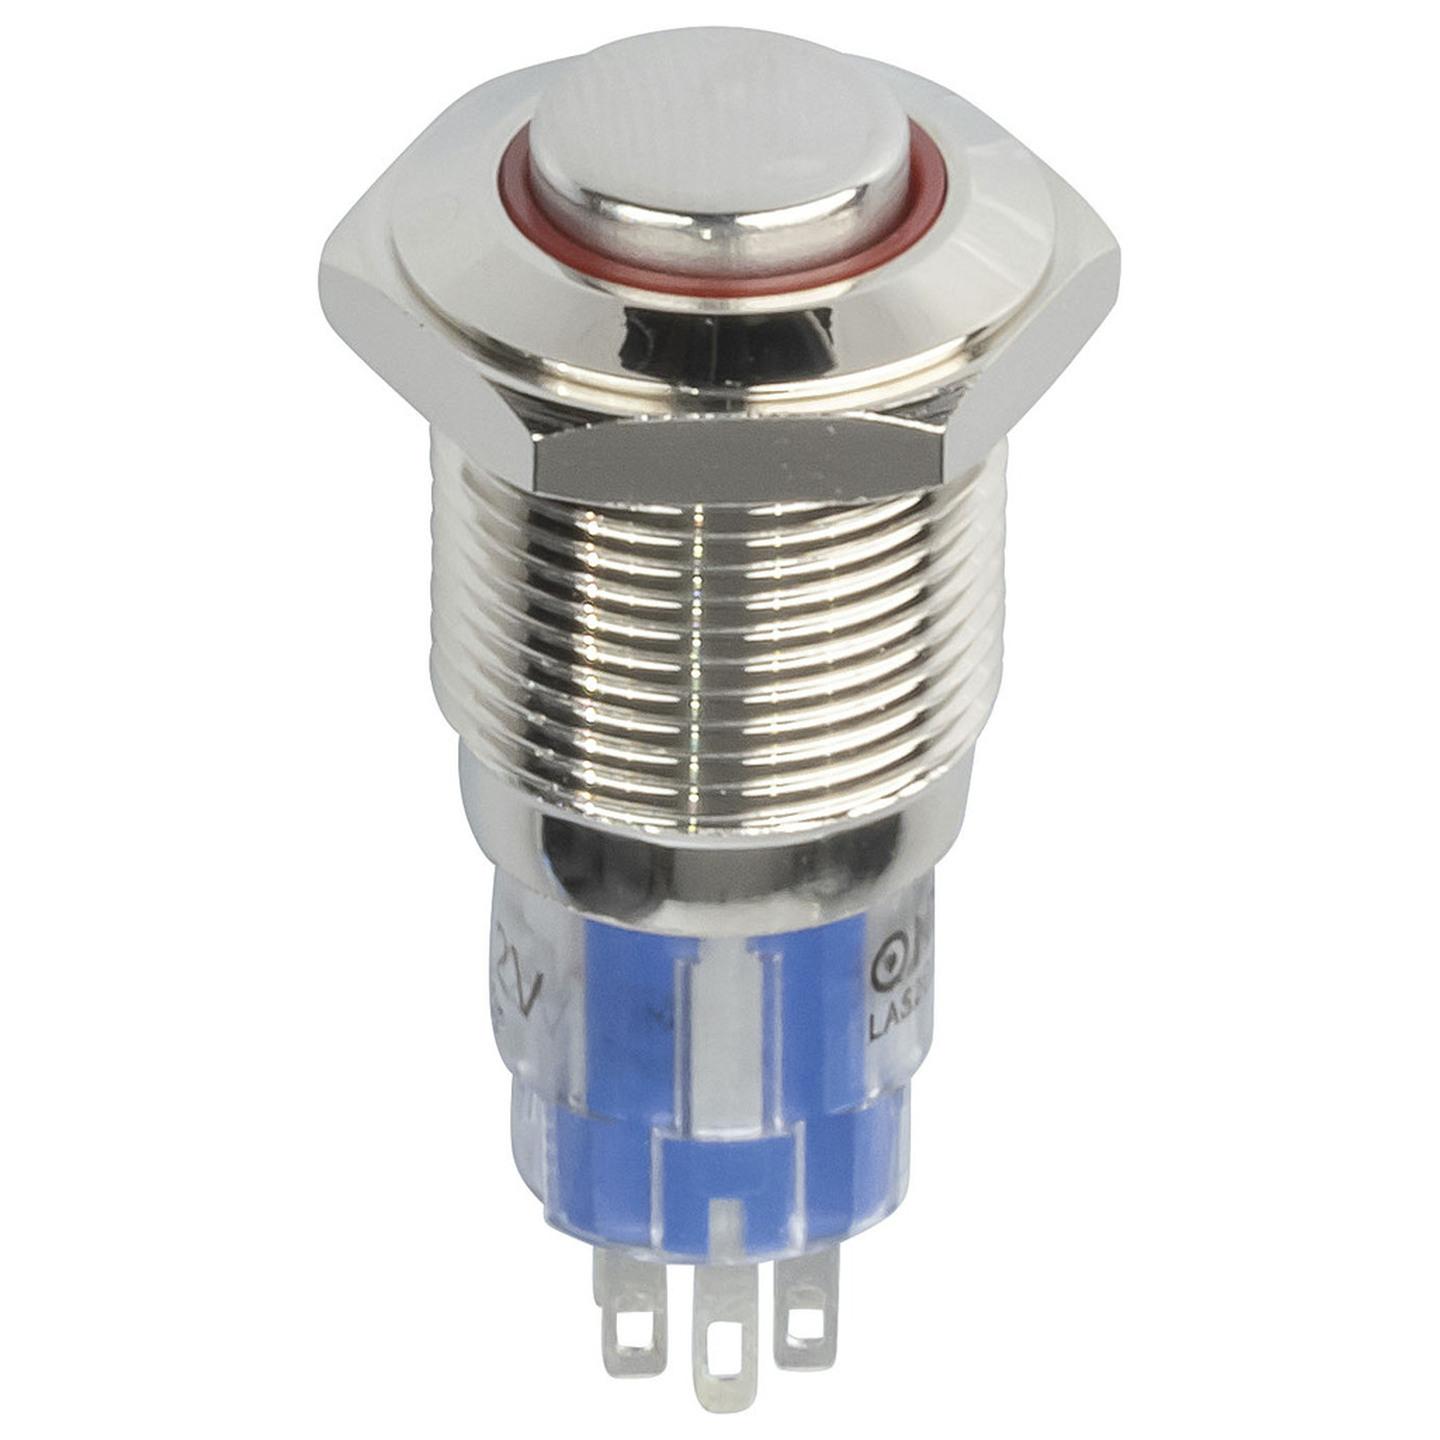 IP67 Rated Illuminated Pushbutton Switch Red